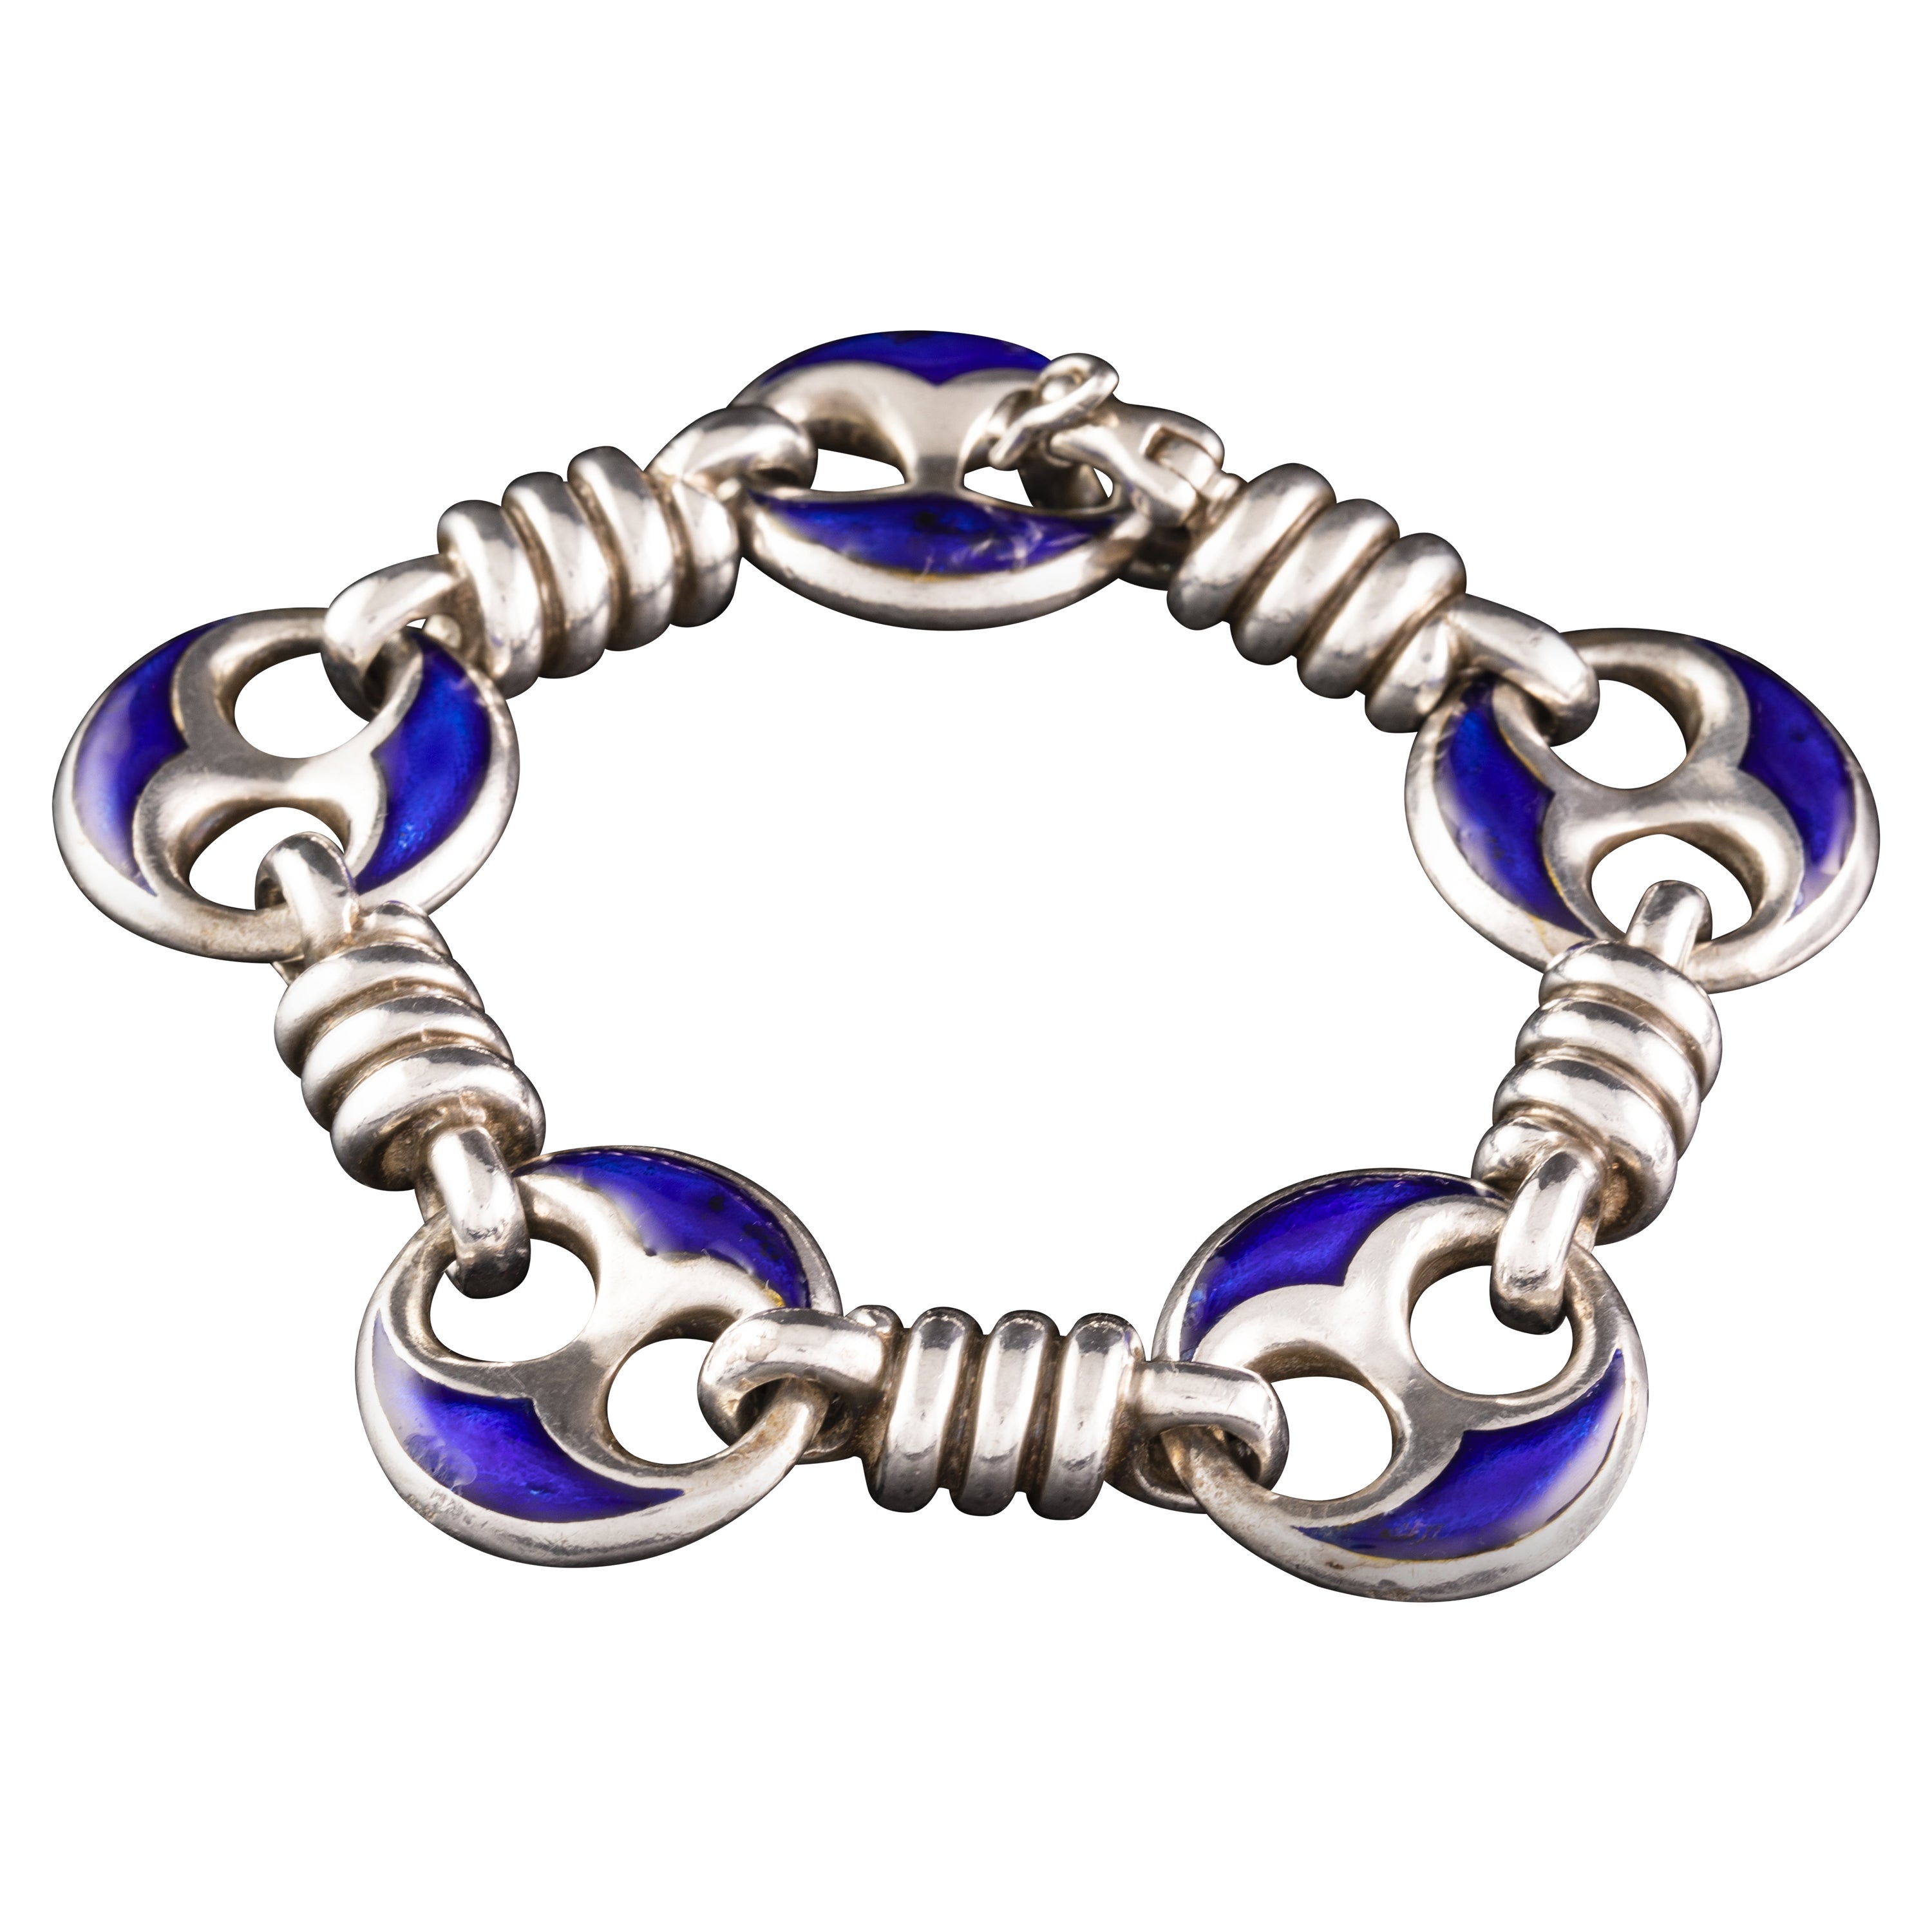 Vintage Sterling Silver and Blue Enamel Bracelet by Gucci from the '60s For Sale